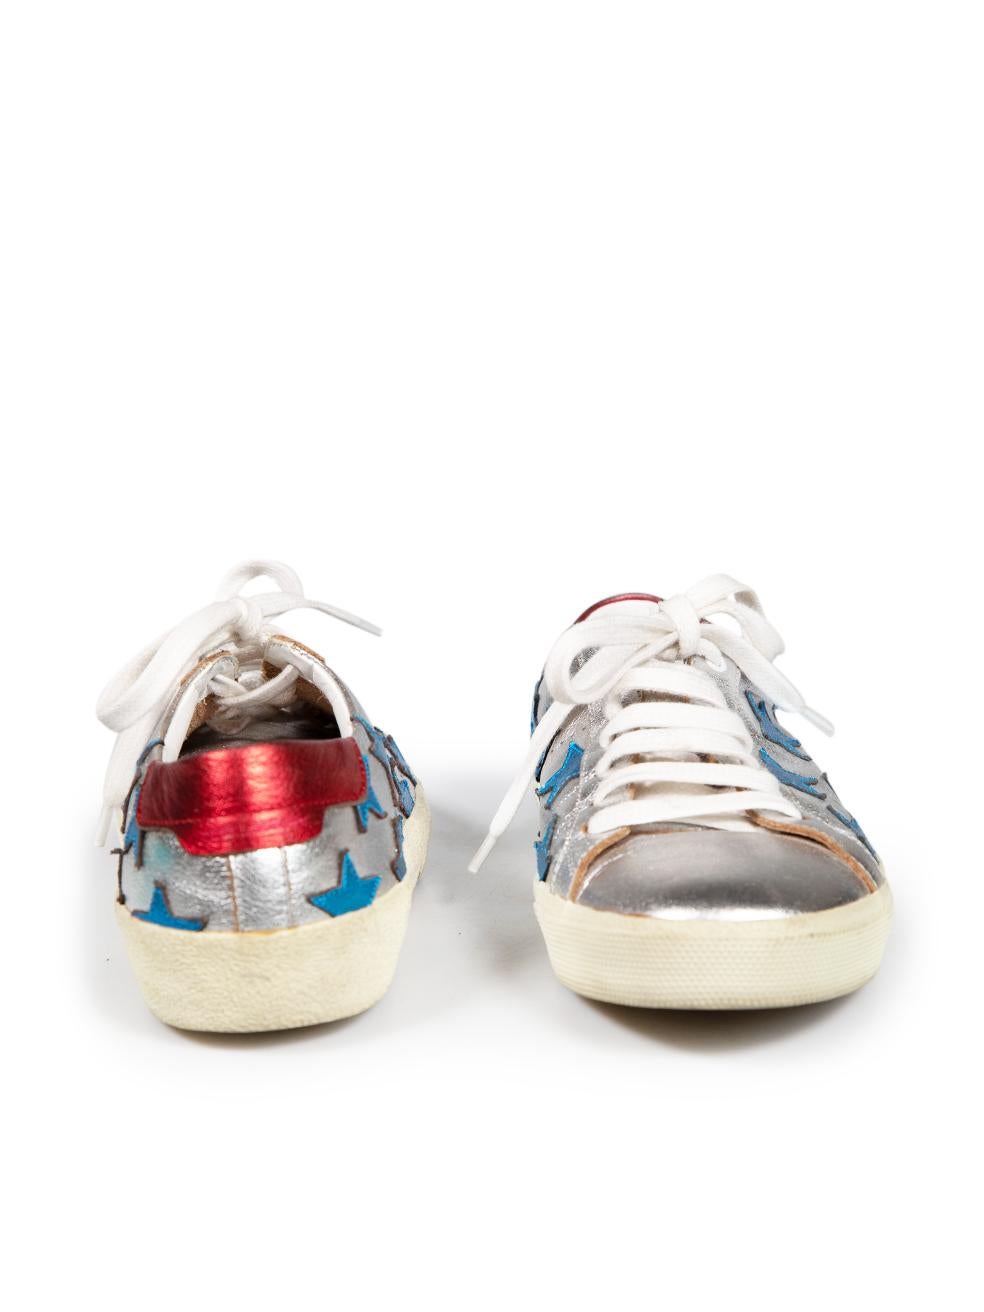 Saint Laurent Silver Leather Star Trainers Size IT 39 In Good Condition For Sale In London, GB